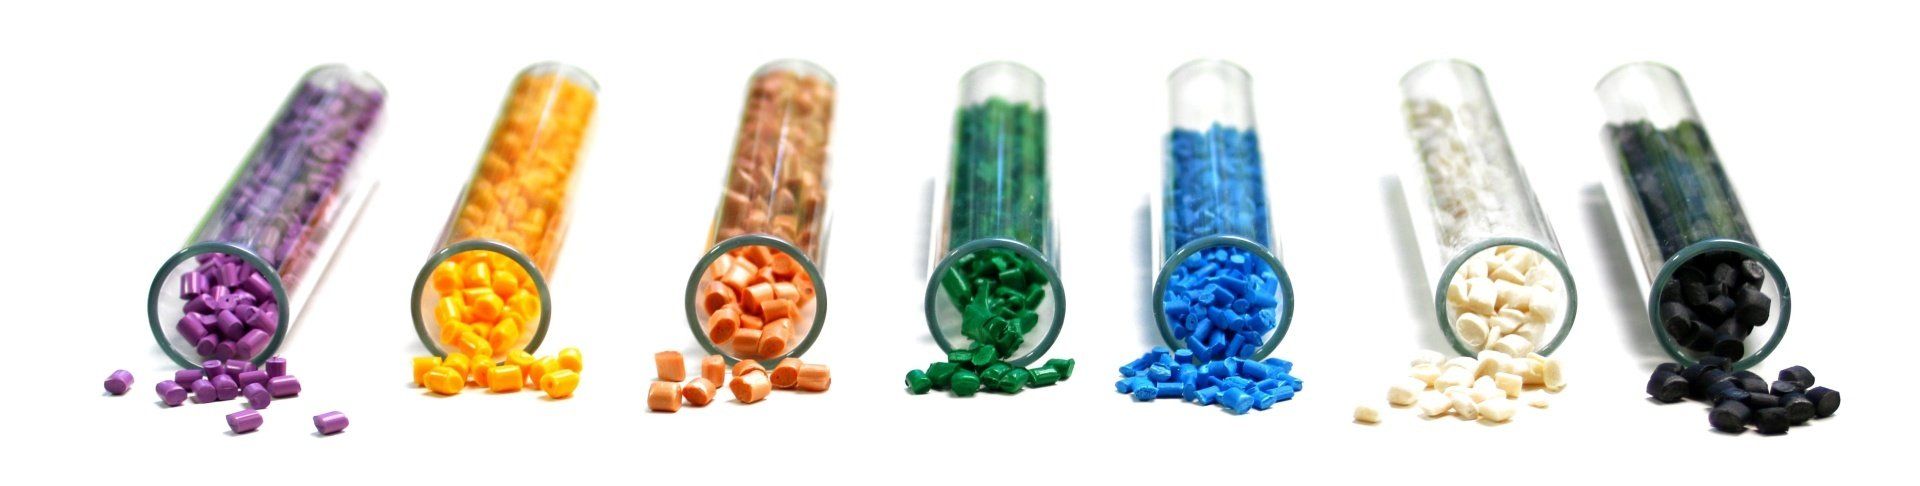 Multicolored plastic granules spilling out of tubes.